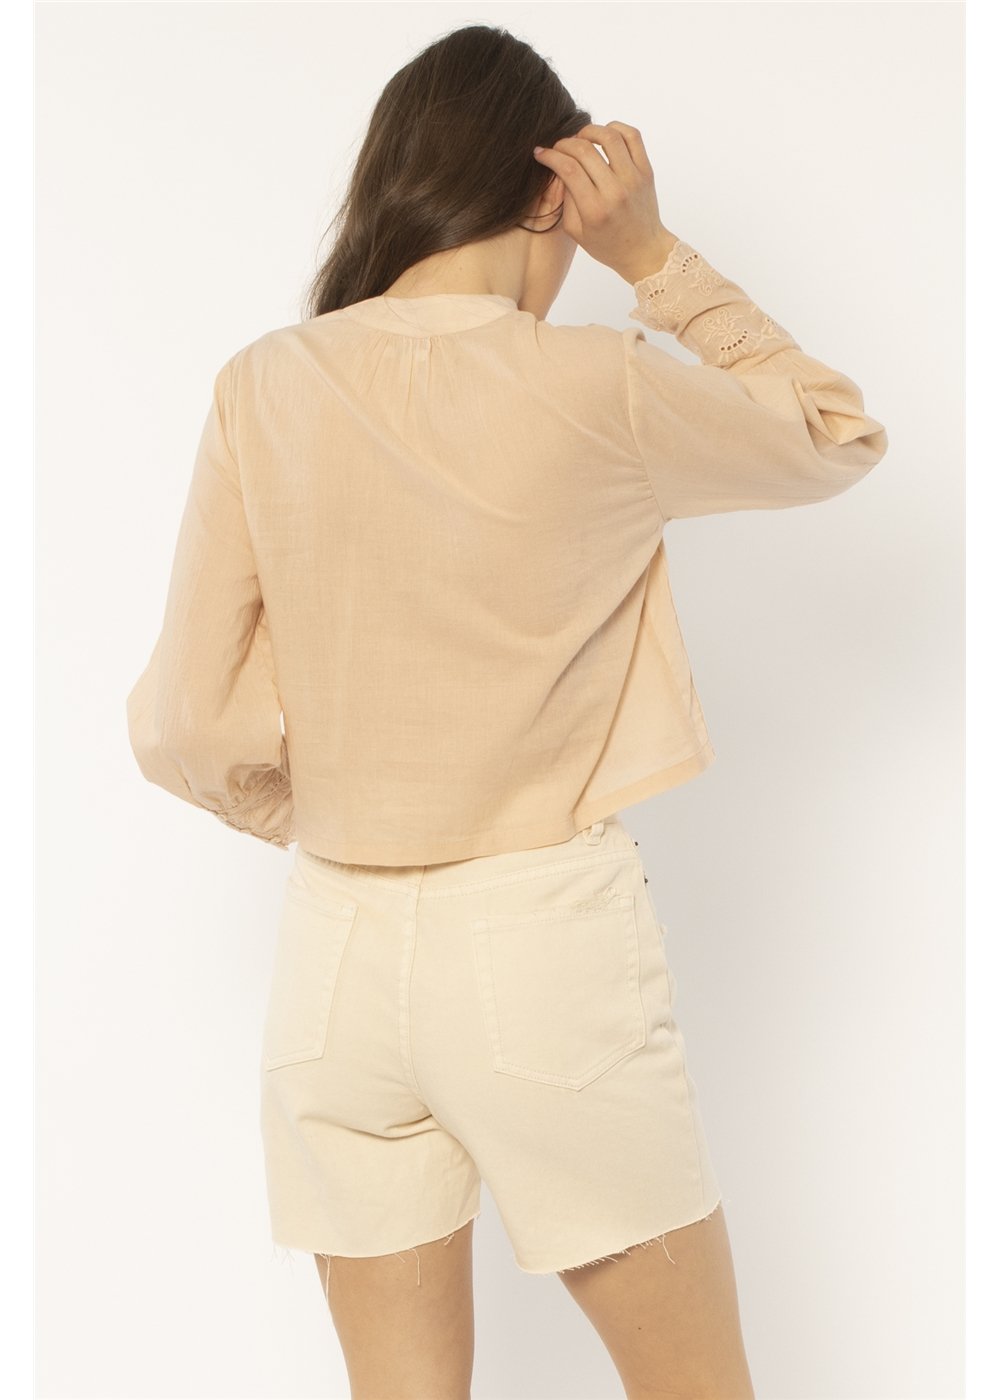 Amuse Society Women's almond cream cliff house long sleeve woven top. Rear View.